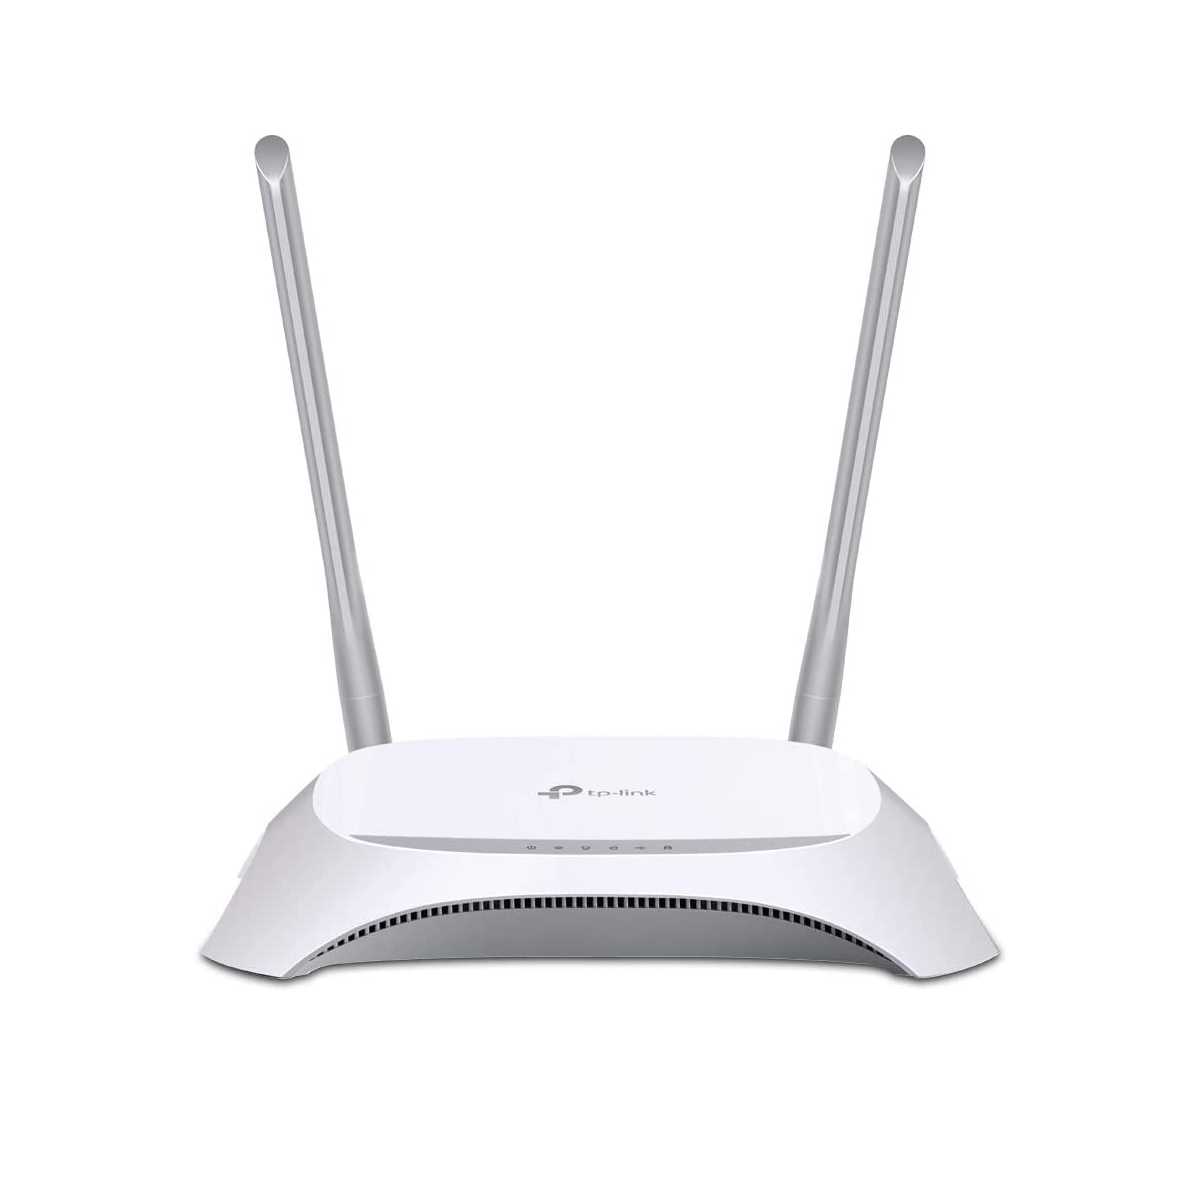 TP-LINK TL-MR3420 3G/4G Router Router WLAN WLAN